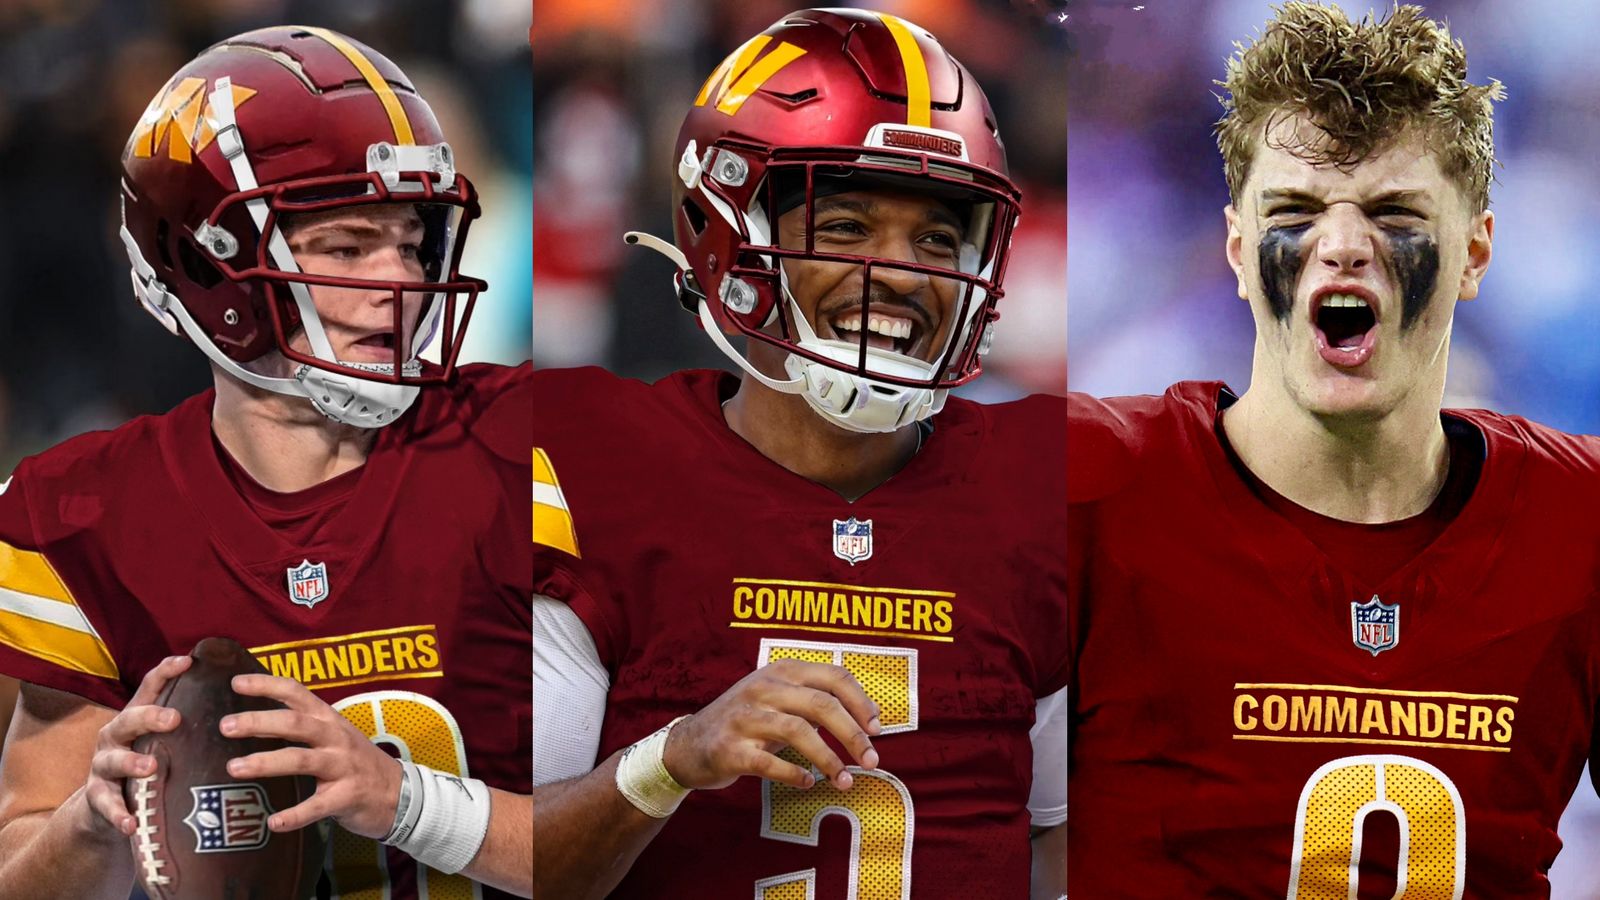 NFL Draft News: Washington Commanders Eyeing Surprise QB Pick That Will Divide Fans